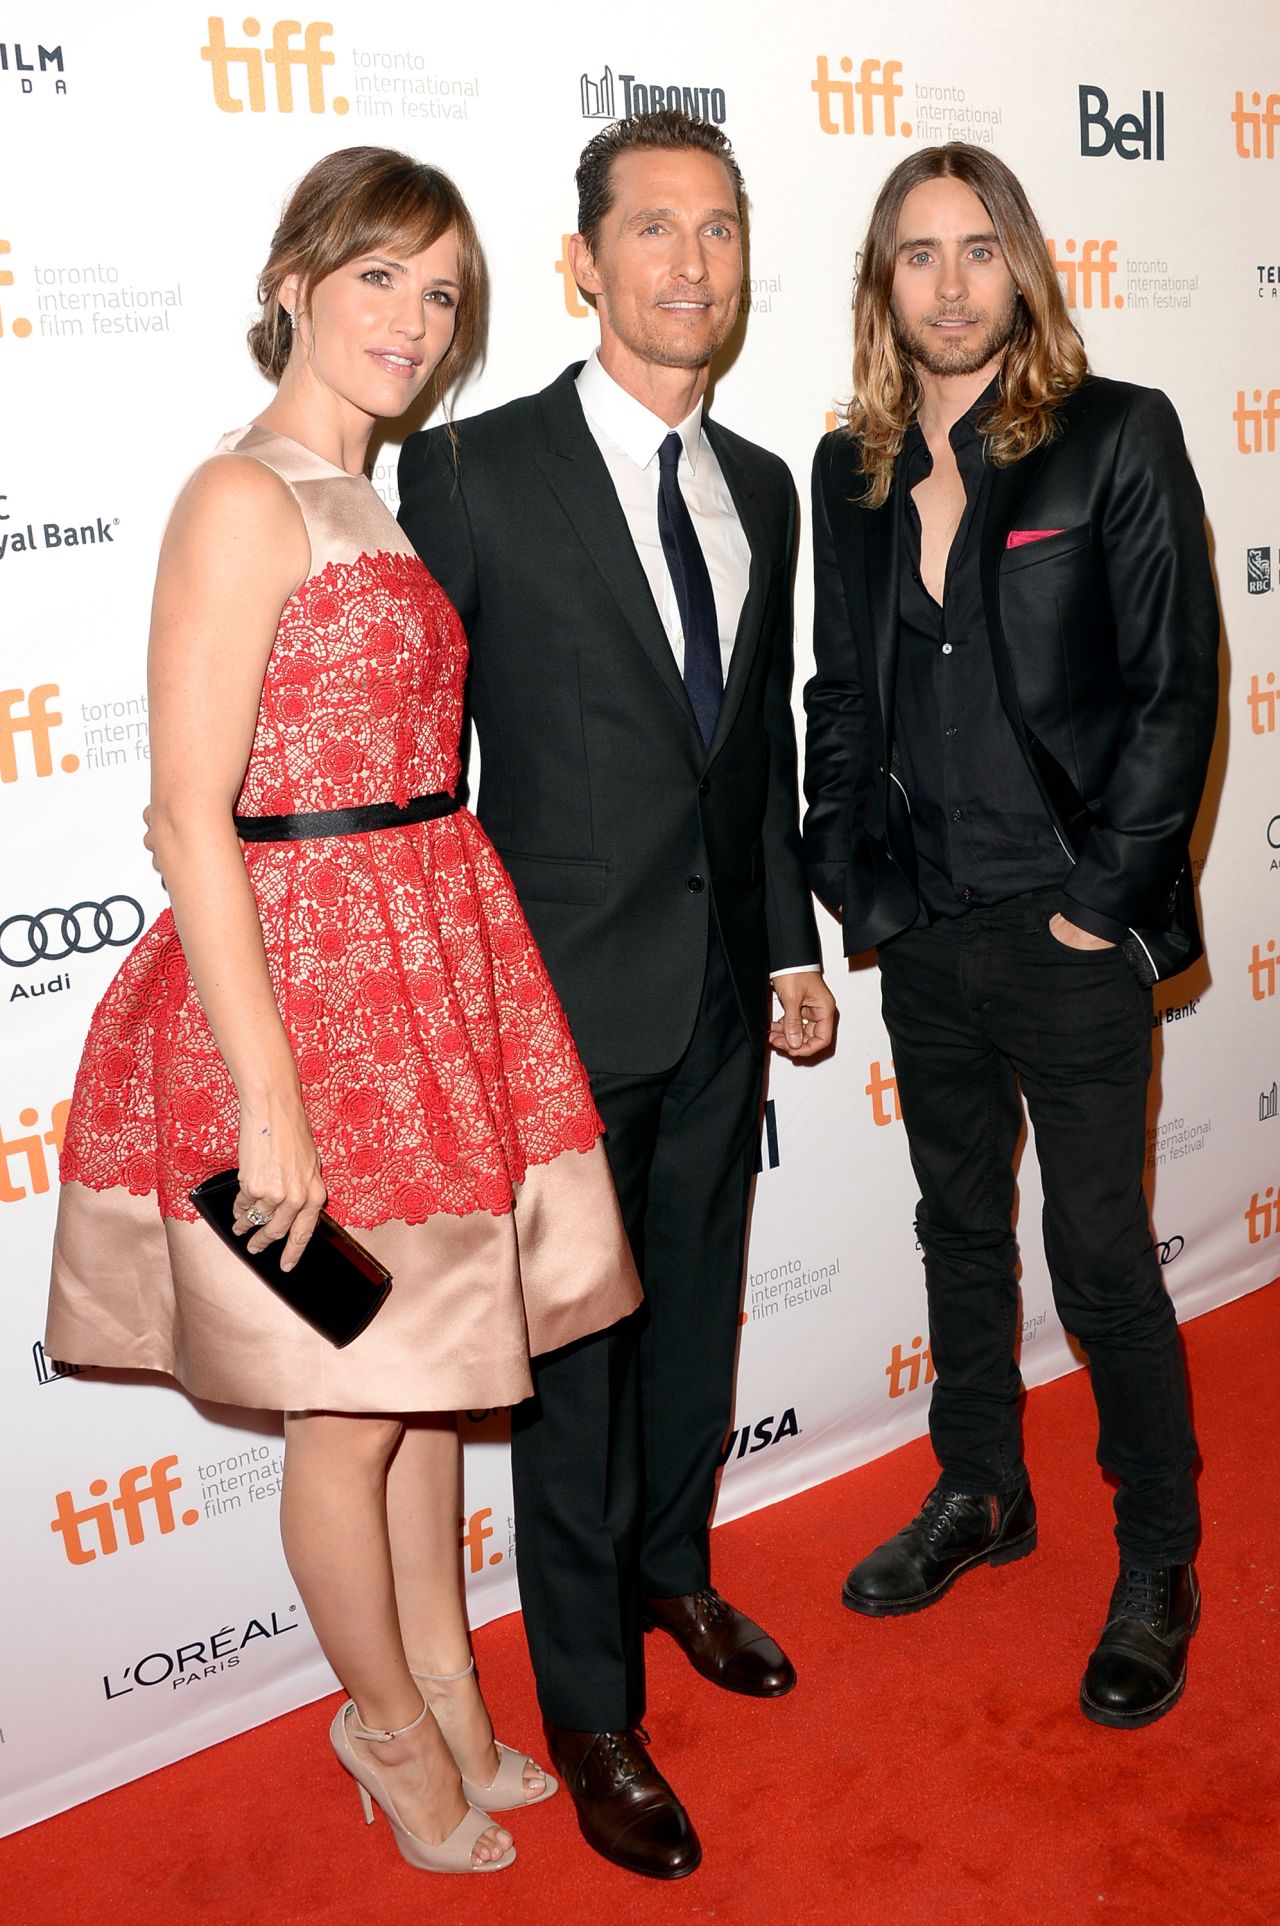 Actors Jennifer Garner, Matthew McConaughey and Jared Leto arrive at the "Dallas Buyers Club" premiere on September 7.